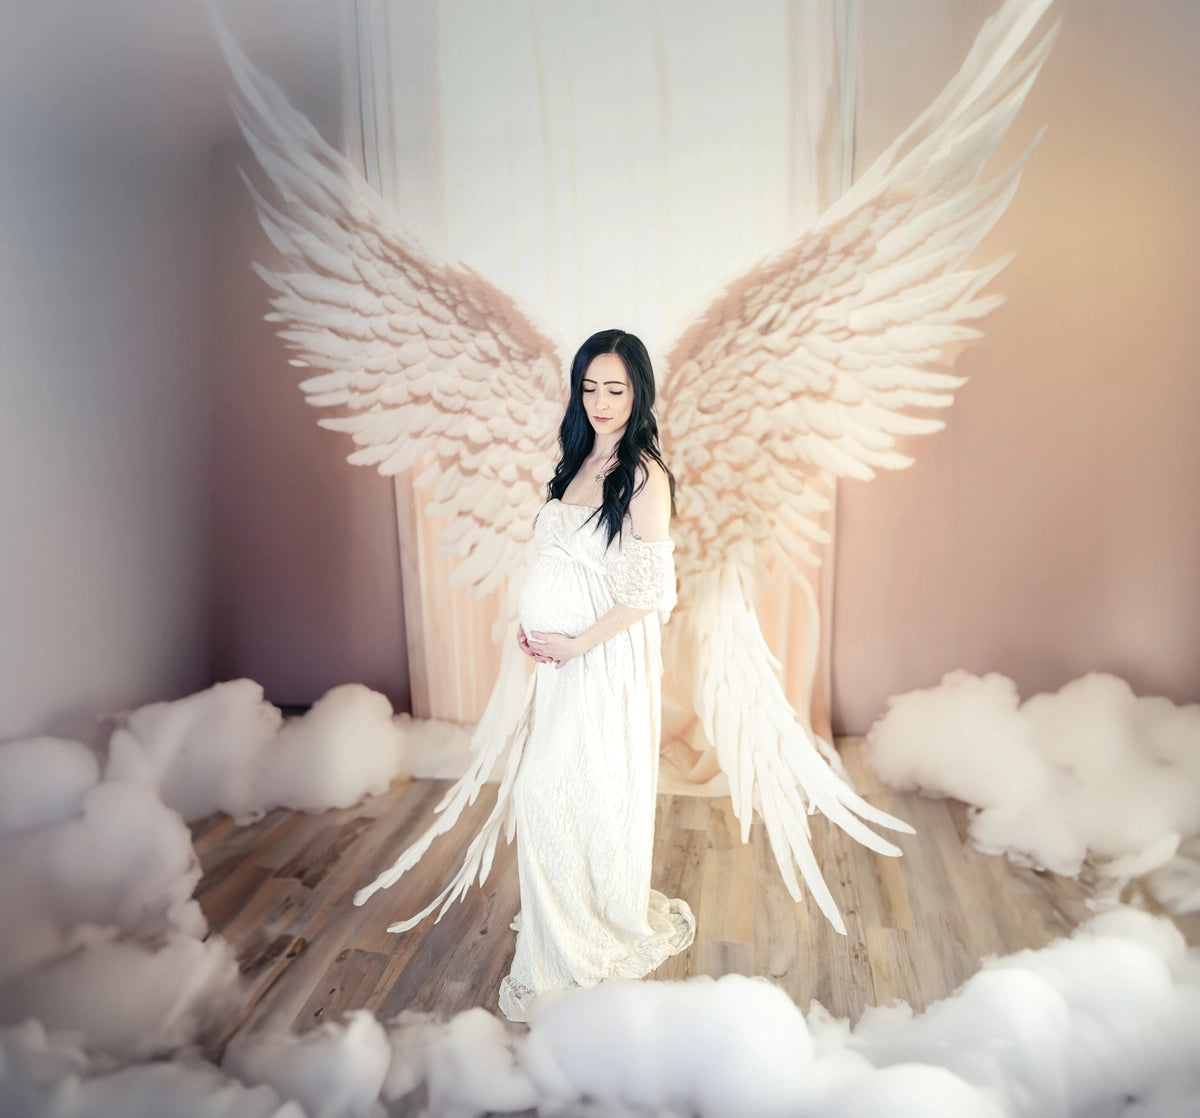 Large Angel Wings for Backdrop -  Canada